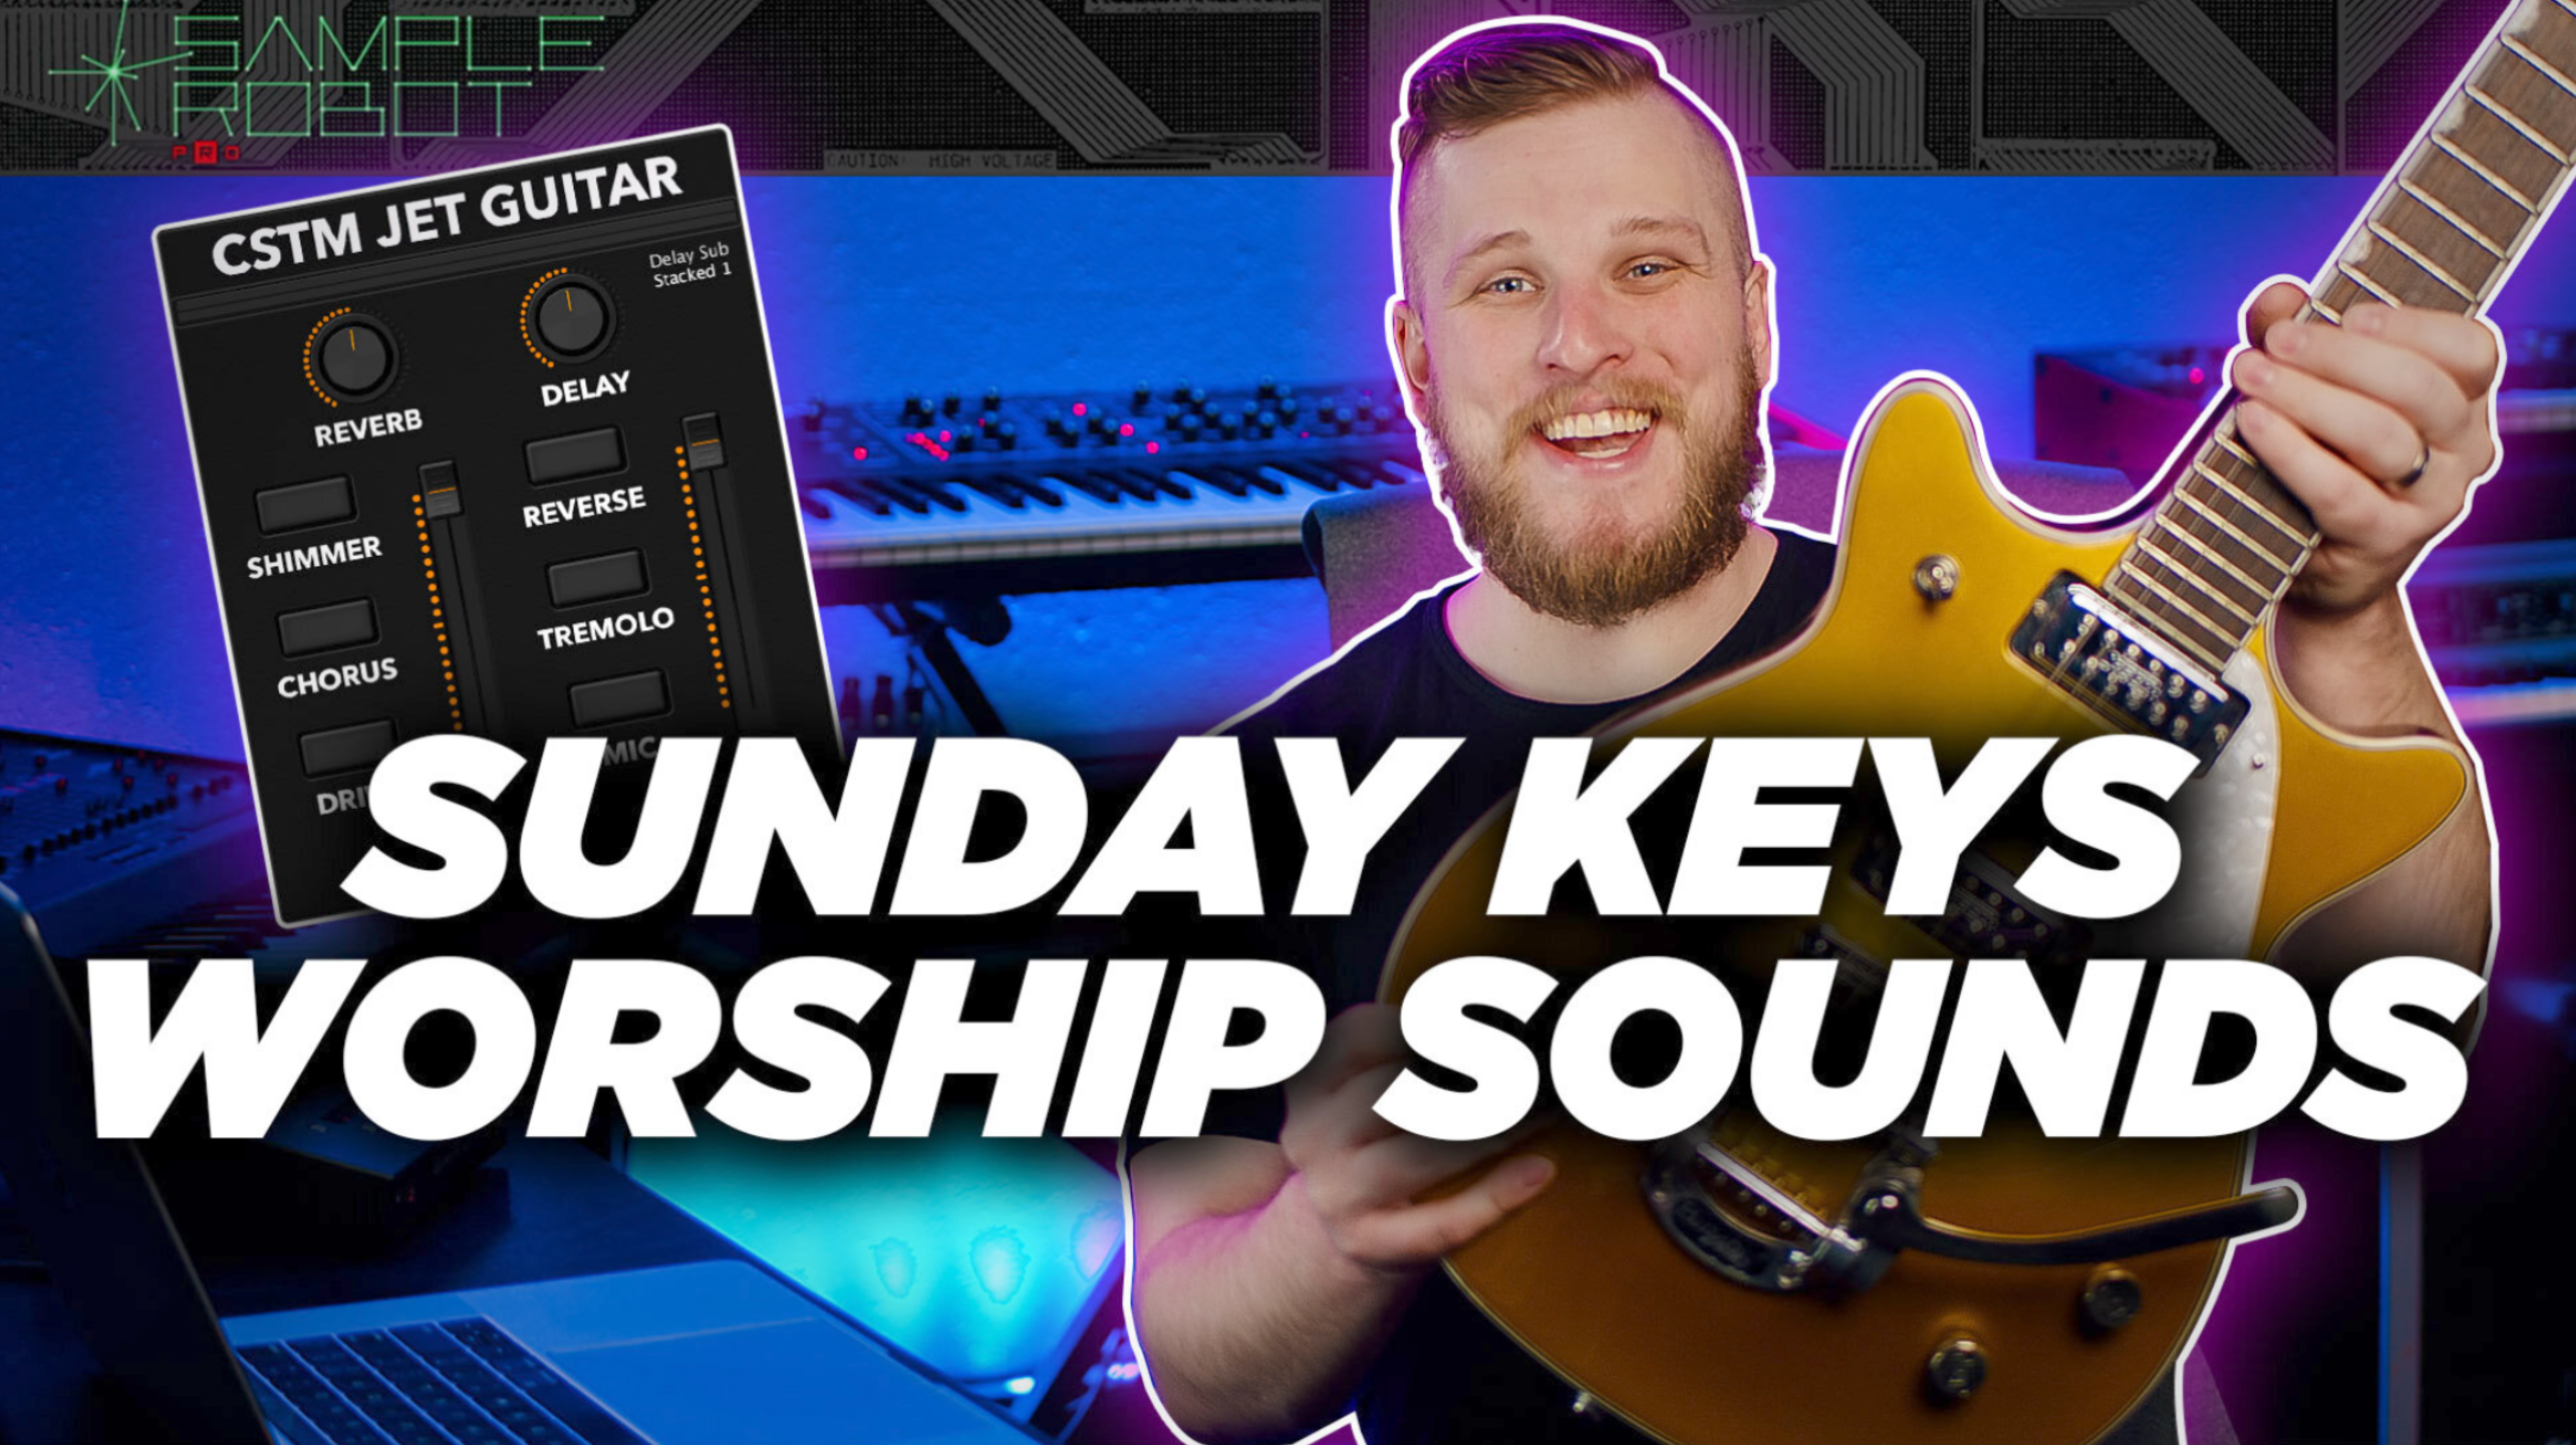 Sunday Keys Template Sounds- New Worship Patches in Patch Stories Ep 3